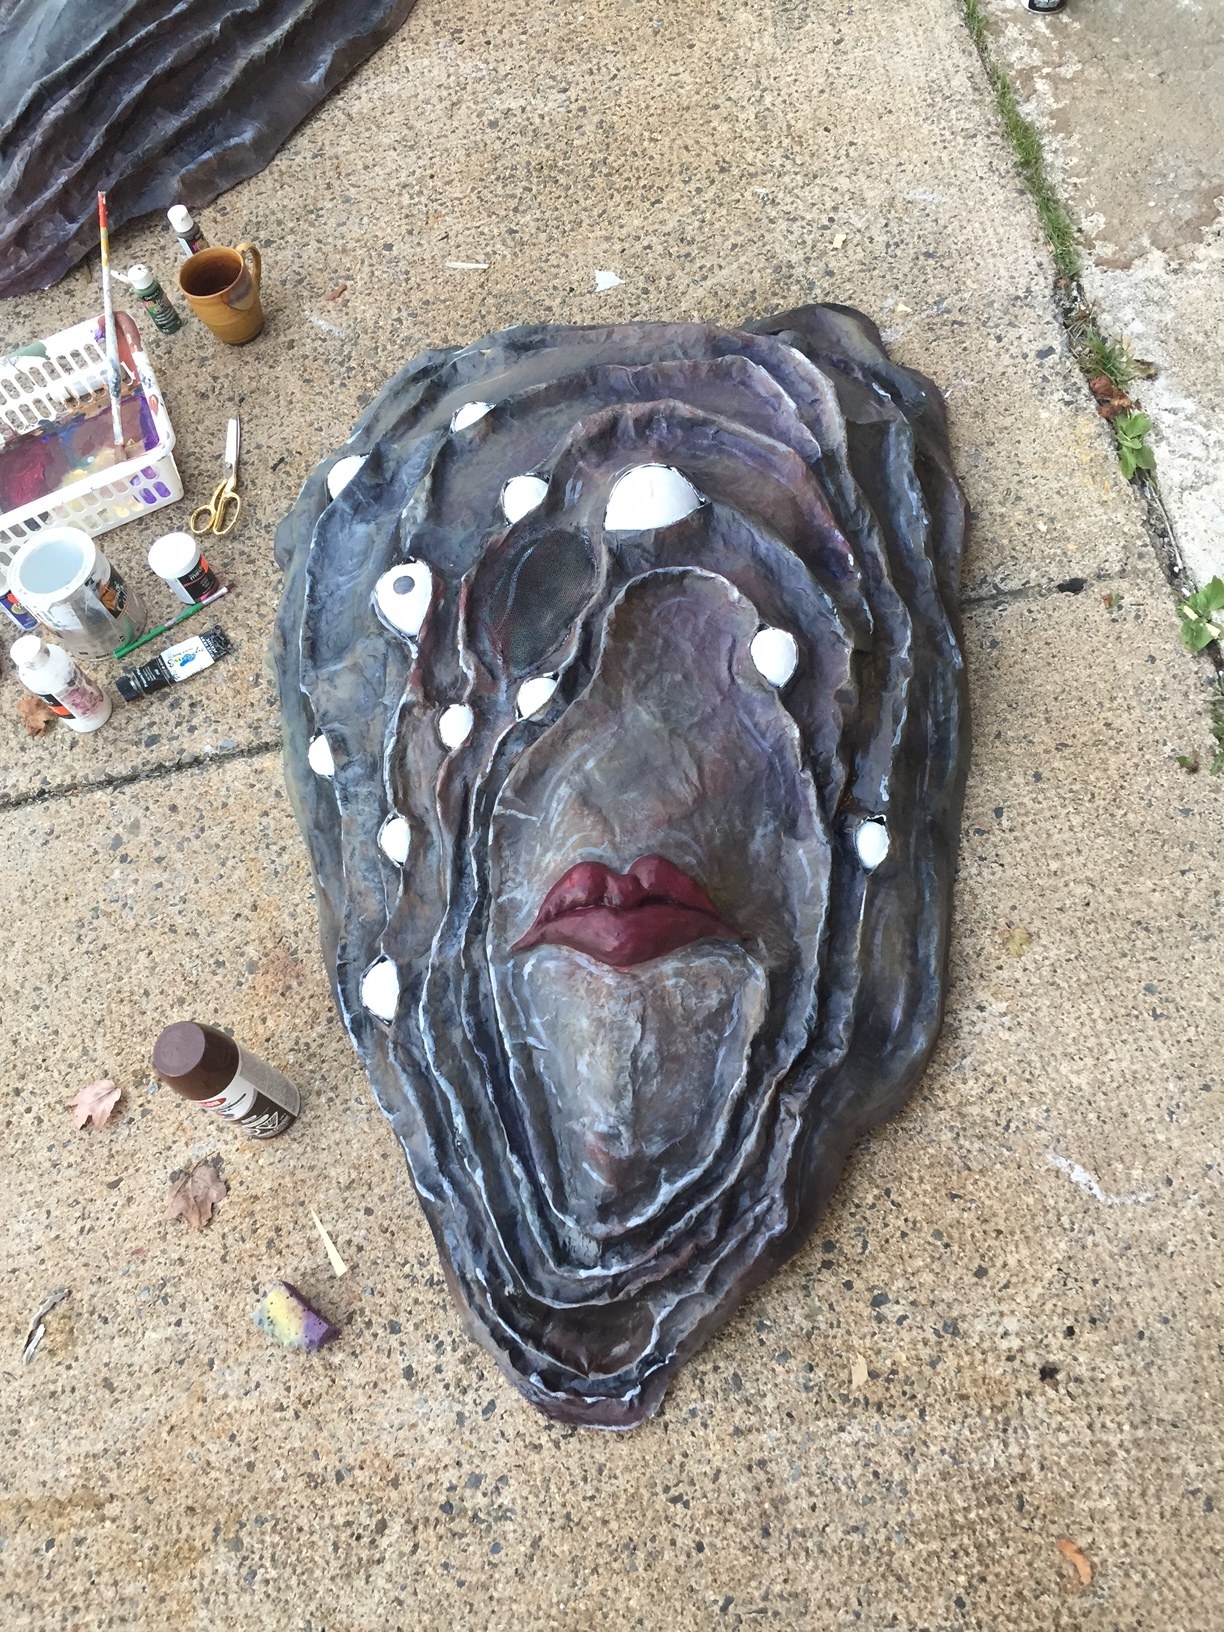 The lifeless oyster costume sits incomplete on the floor as its eyes are painted on